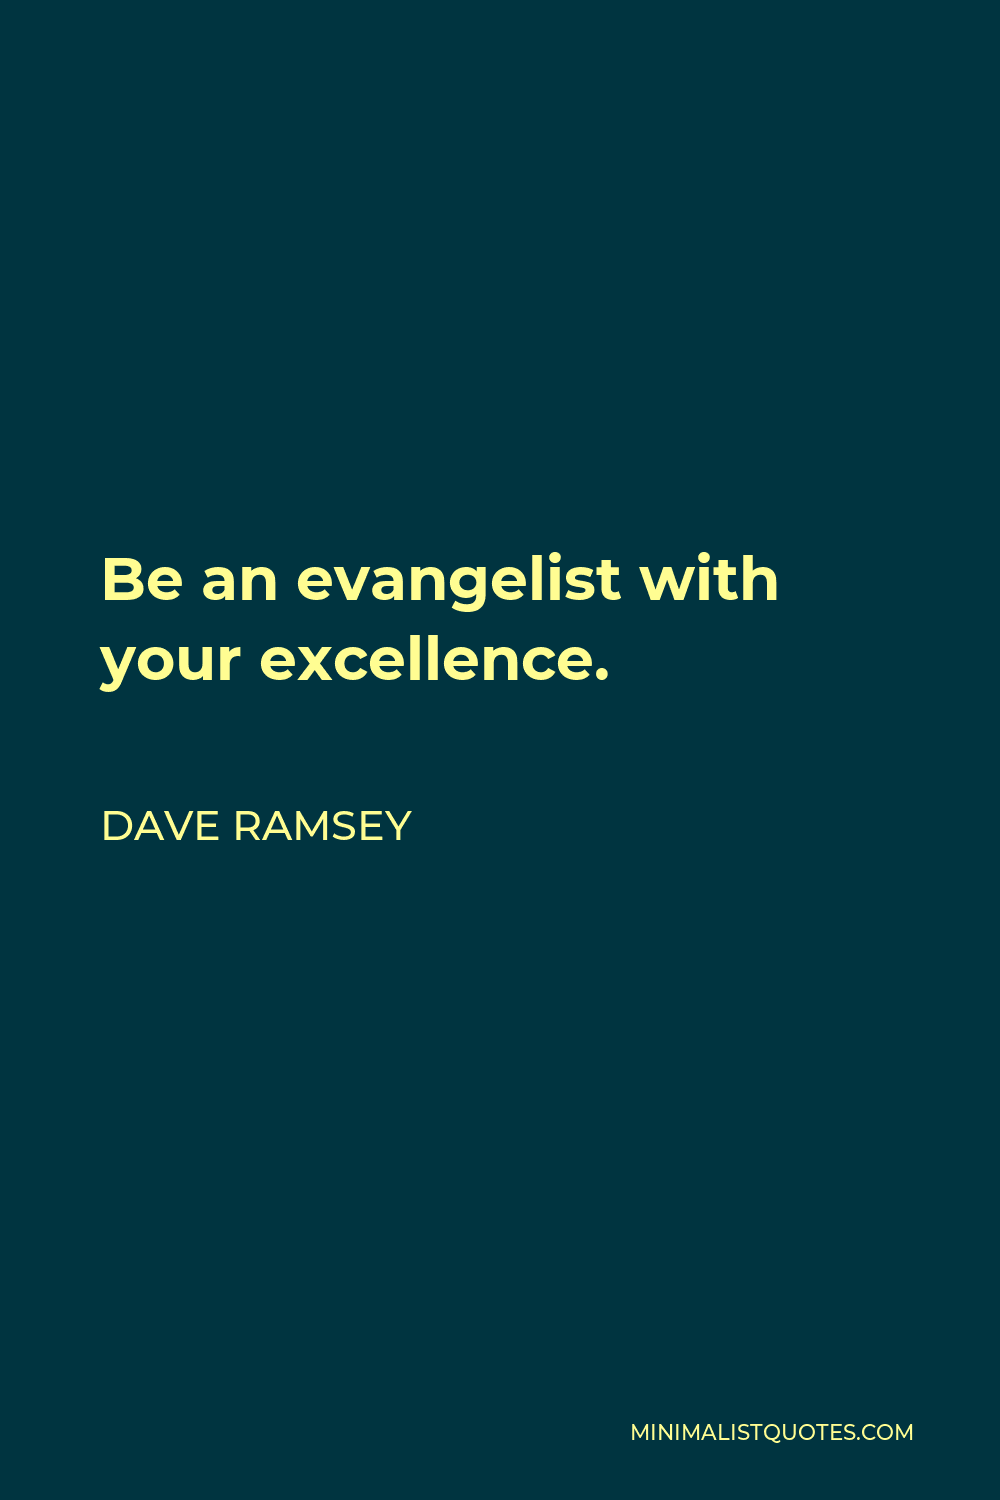 Dave Ramsey Quote - Be an evangelist with your excellence.